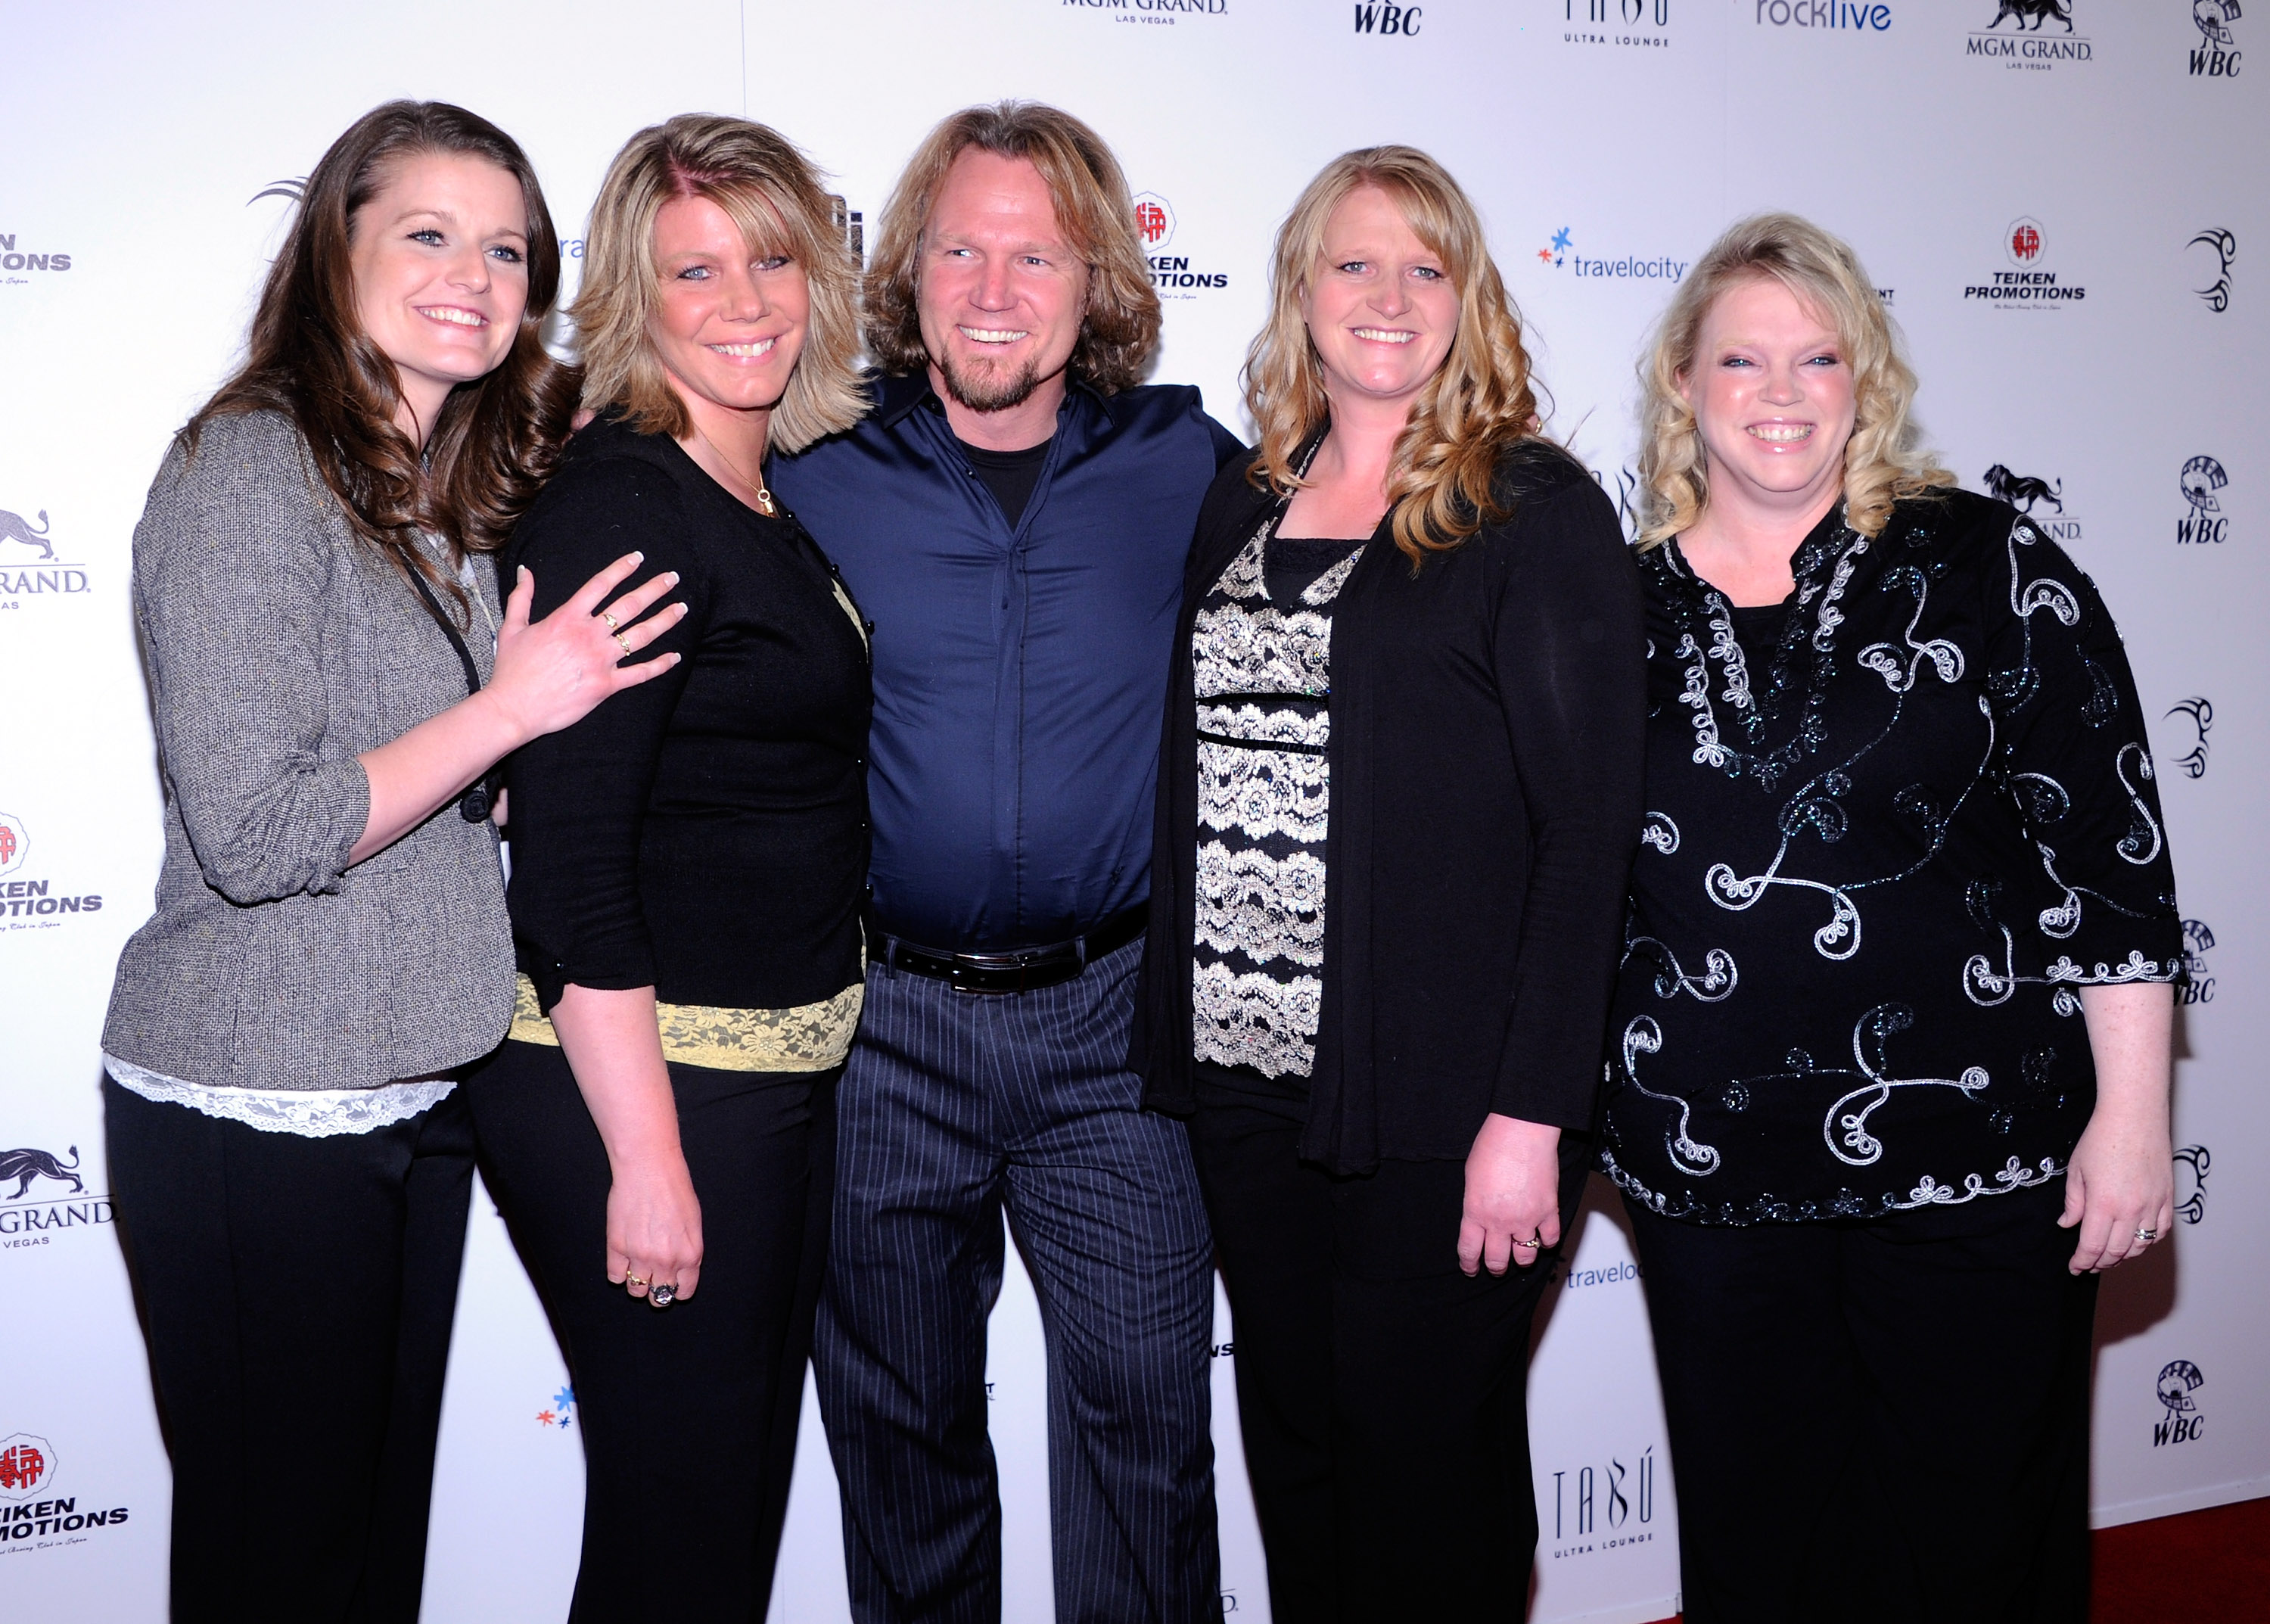 'Sister Wives' stars, Robyn Brown, Meri Brown, Kody Brown, Christine Brown and Janelle Brown, attend the opening of 'Mike Tsyson: Undisputed Truth' in Las Vegas